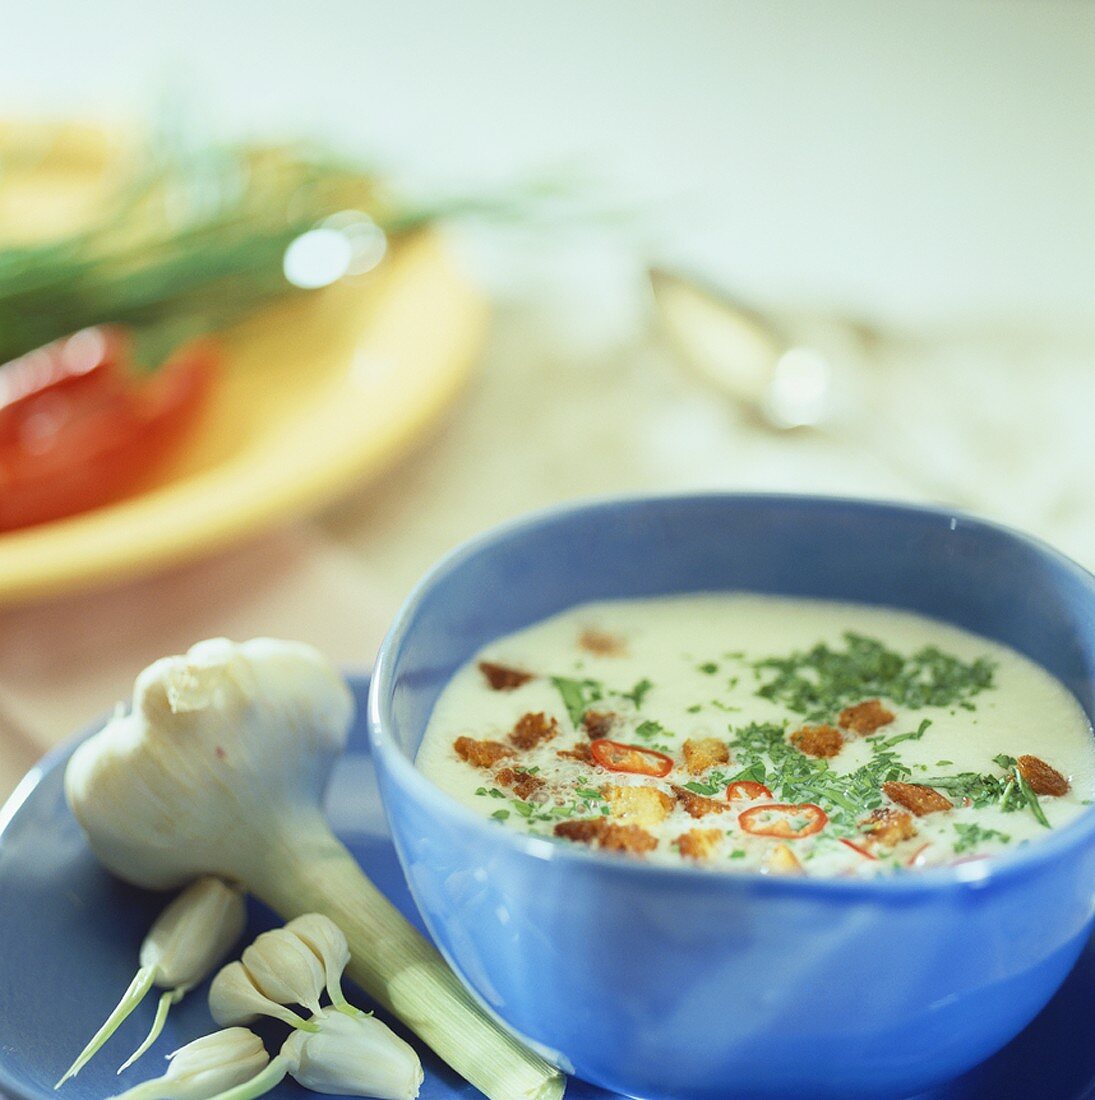 Garlic soup with croutons, chilli and herbs